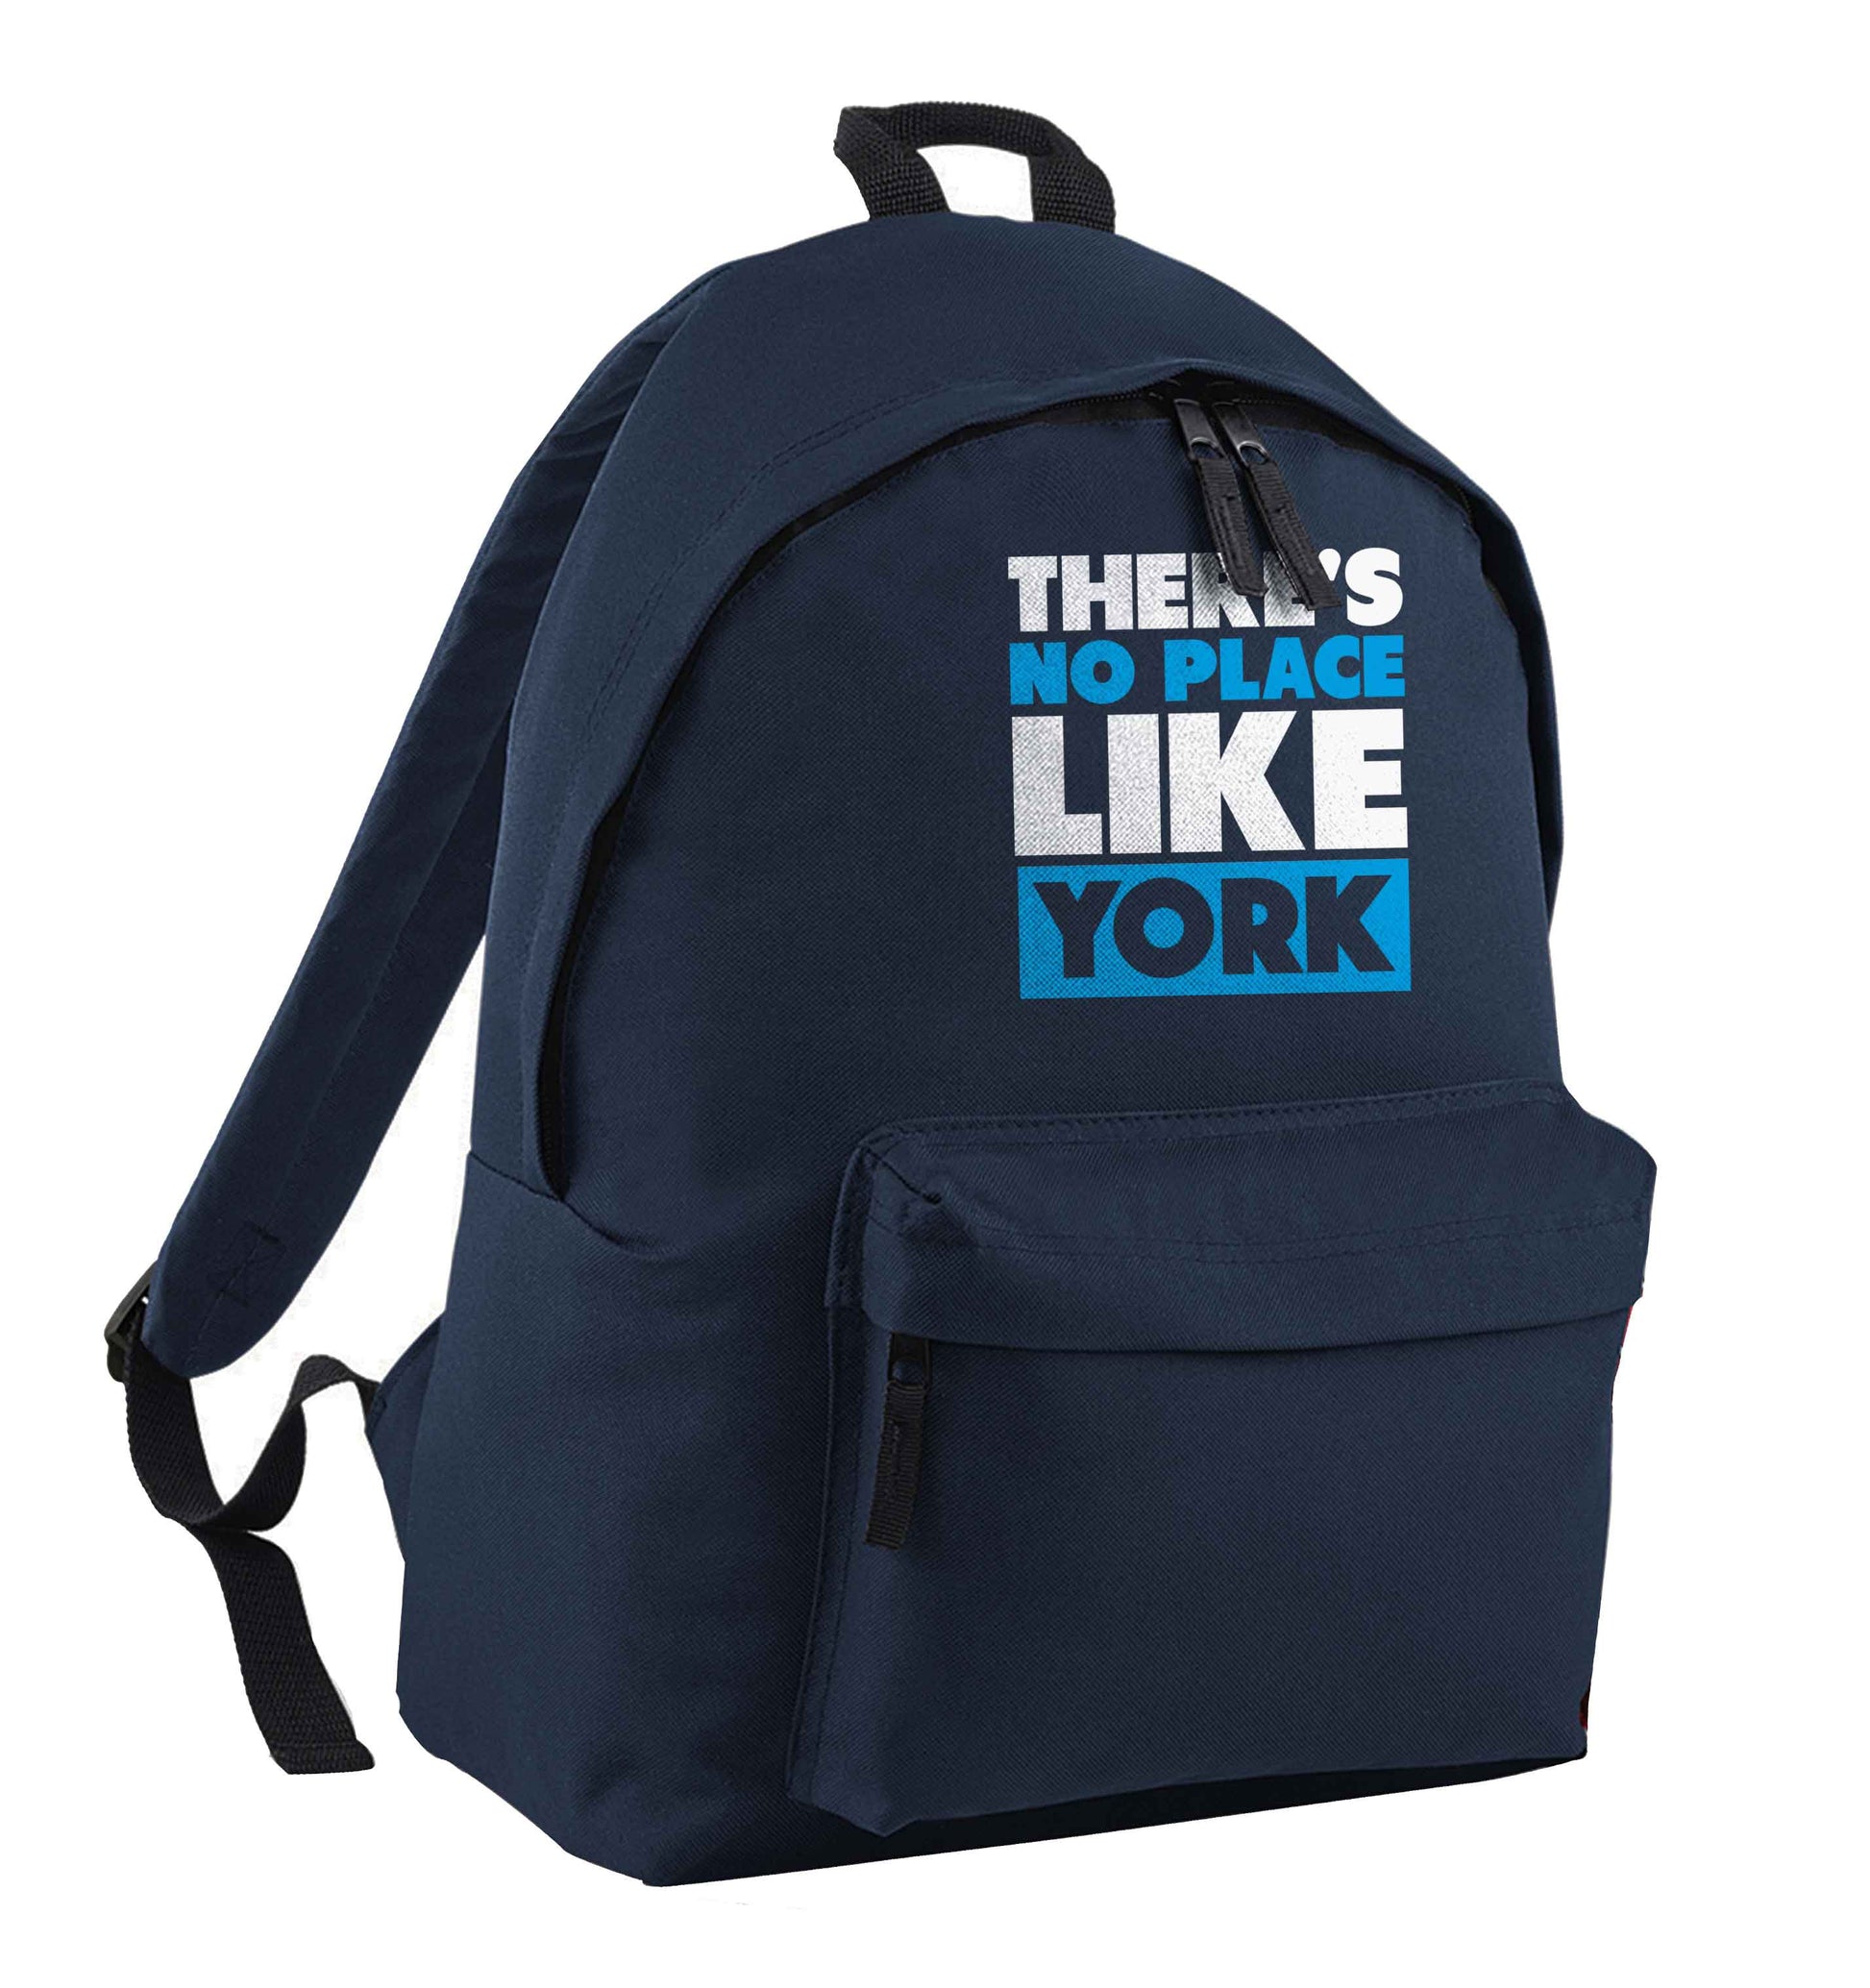 There's no place like york navy adults backpack